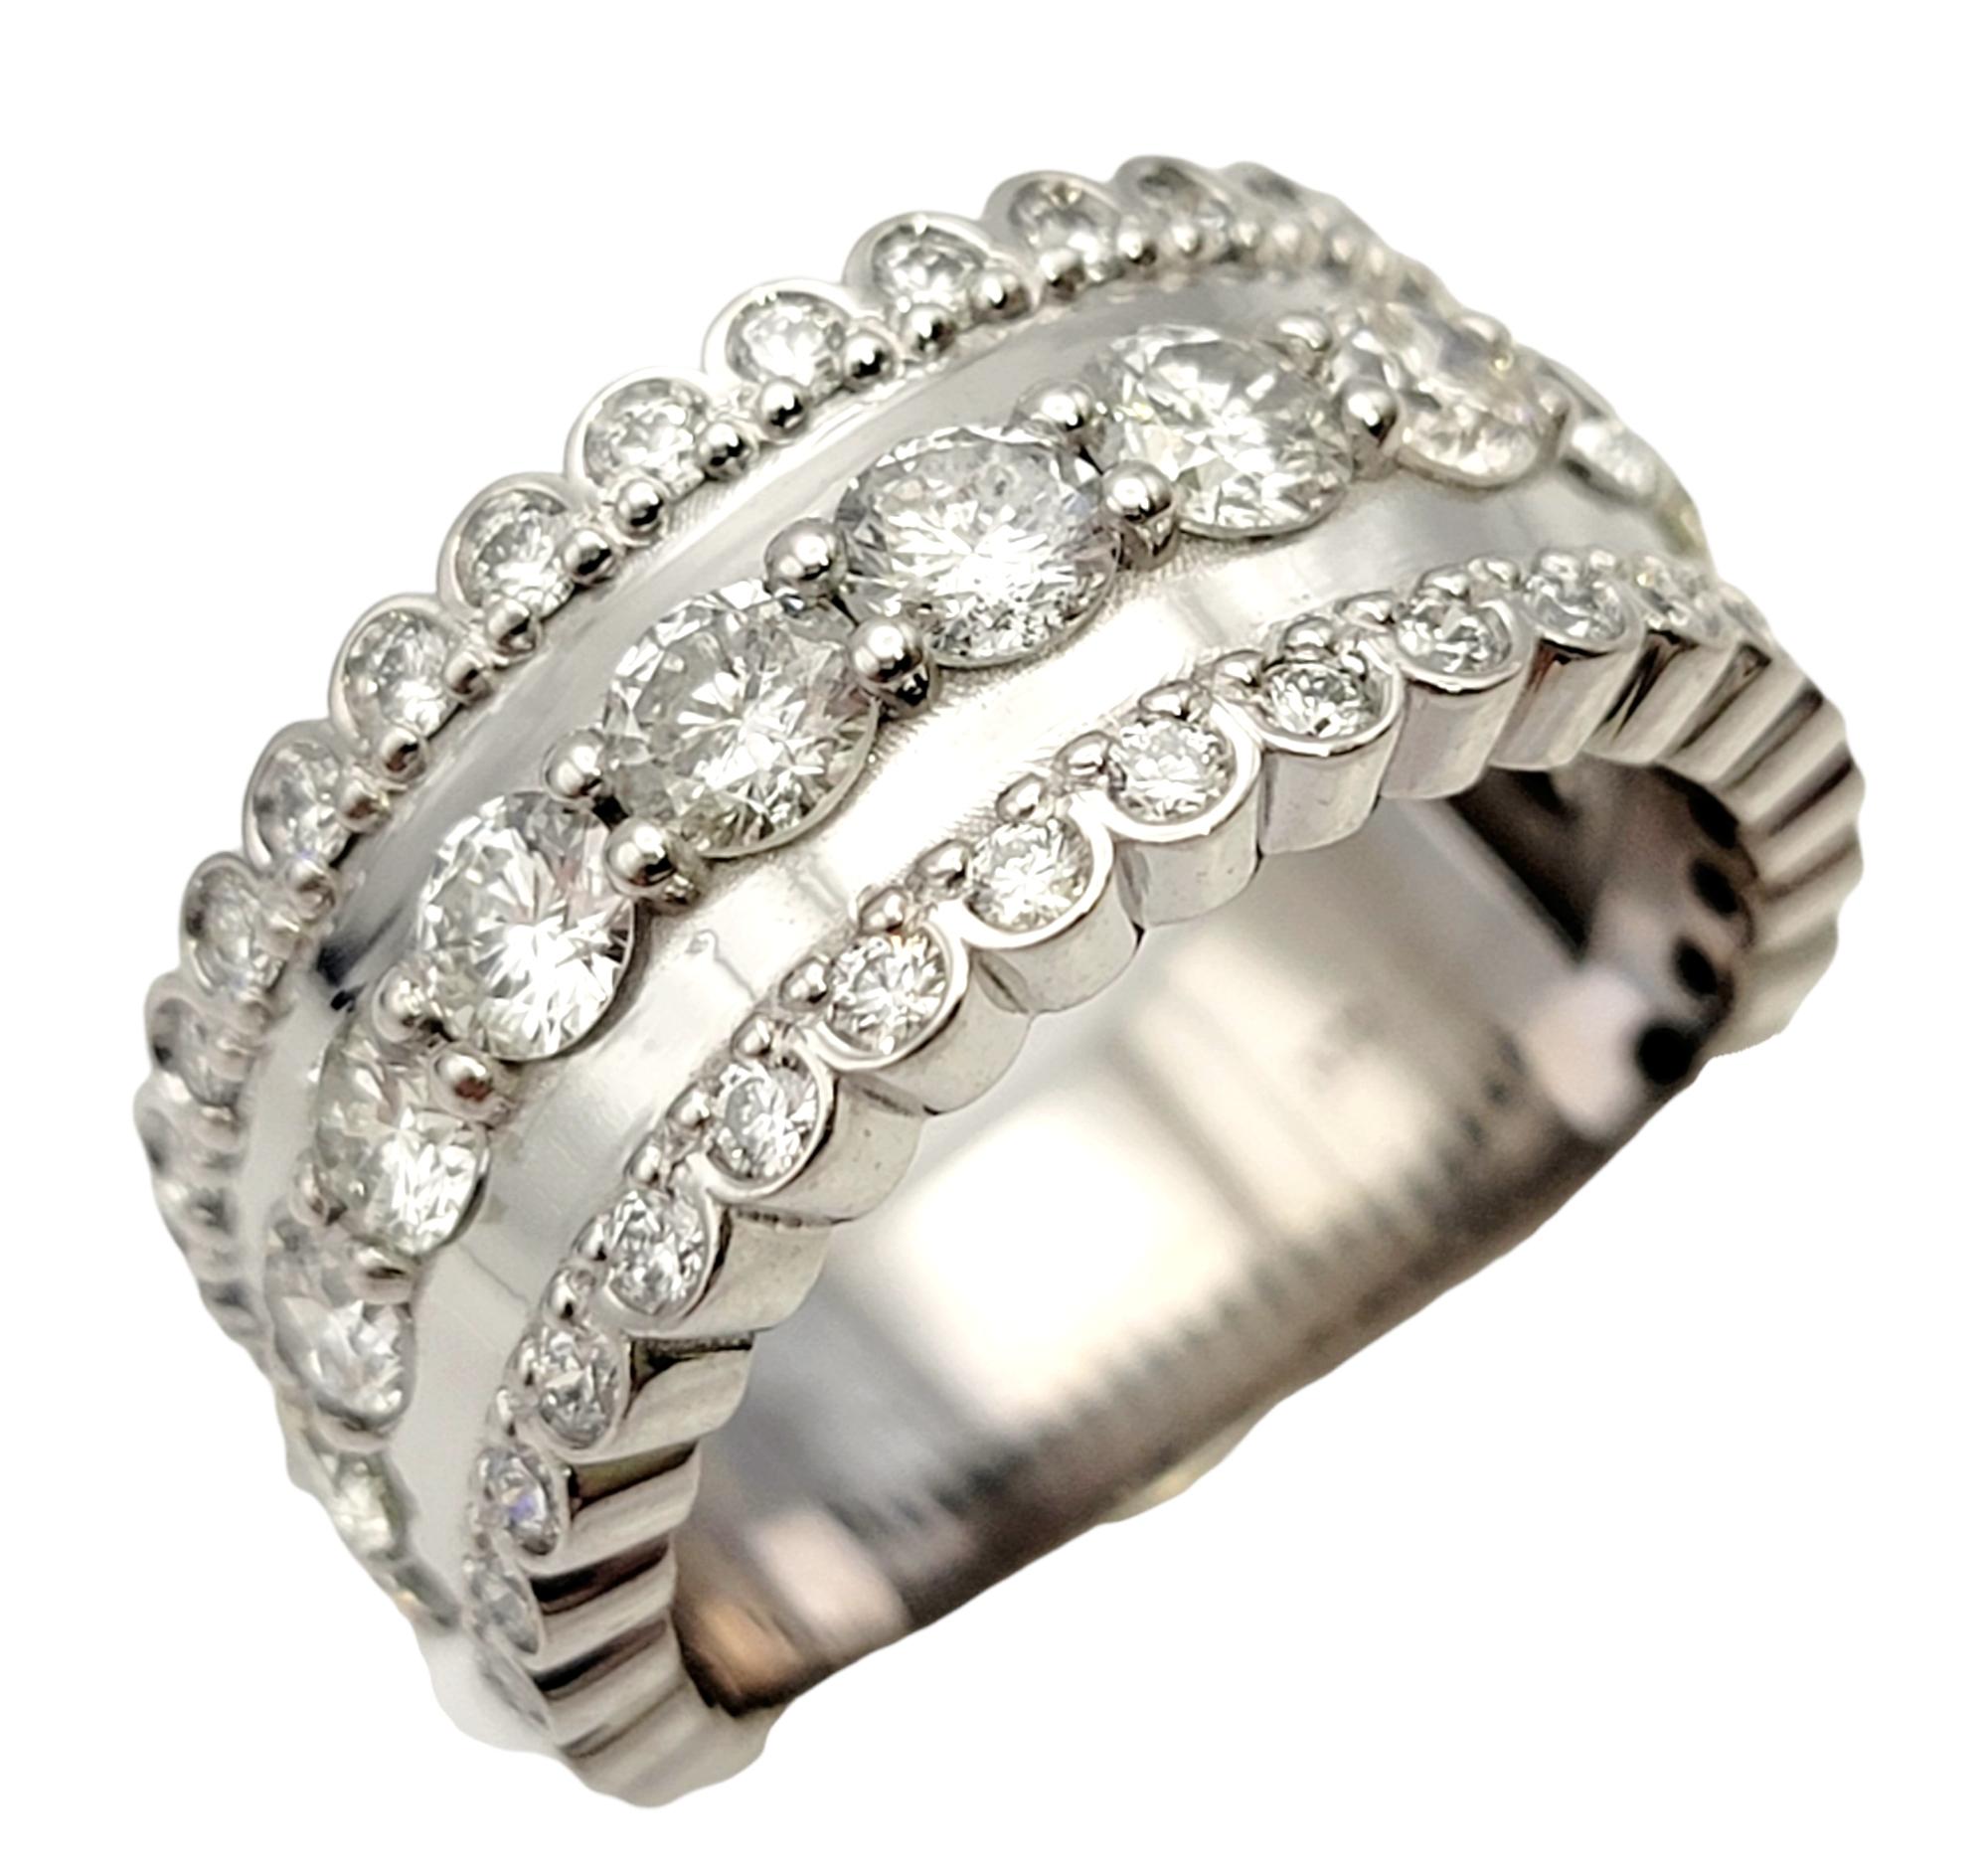 Ring size: 7.25

Stunningly sparkly diamond semi-eternity band ring. This gorgeous ring features 1.85 carats of bright, icy white pave diamonds set in 3 rows in a highly polished 14 karat white gold setting. The center row features the largest of